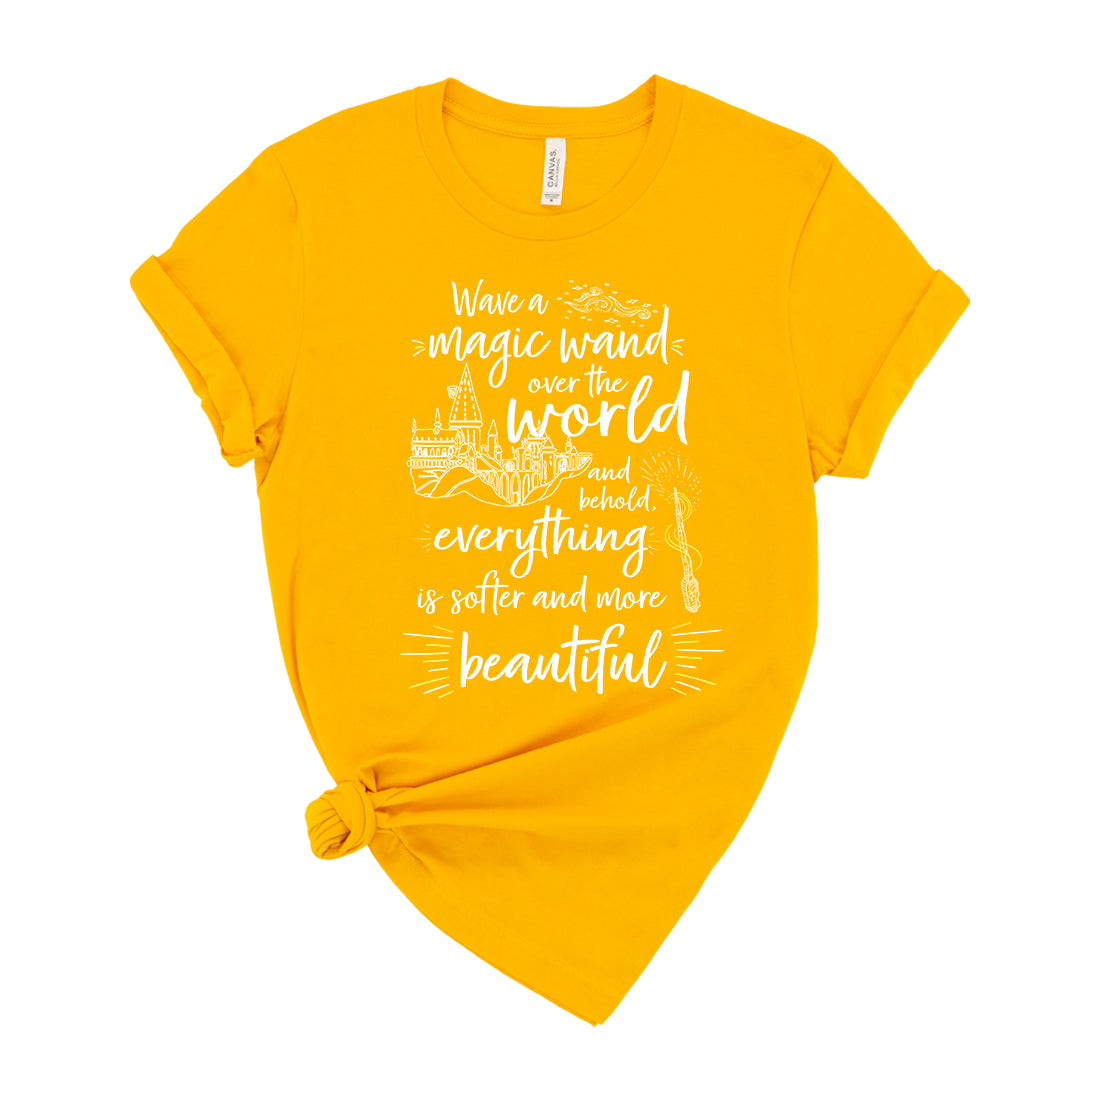 Wave a wand over the world and behold, everything is softer and more beautiful HP Wizard Shirt